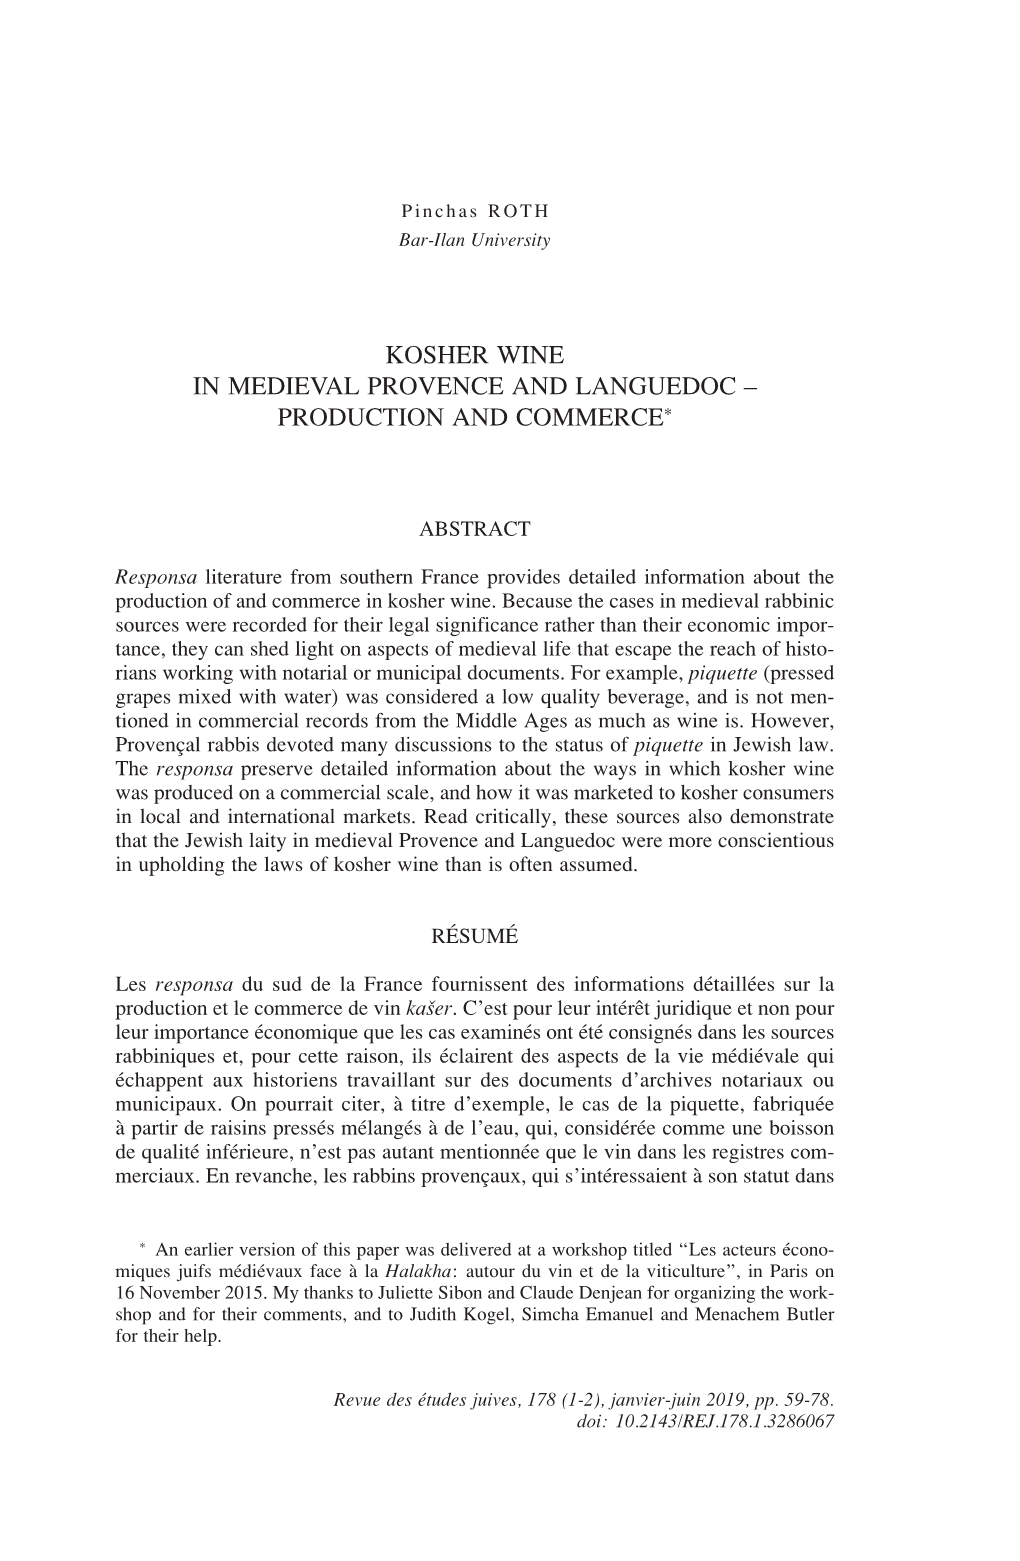 Kosher Wine in Medieval Provence and Languedoc – Production and Commerce∗